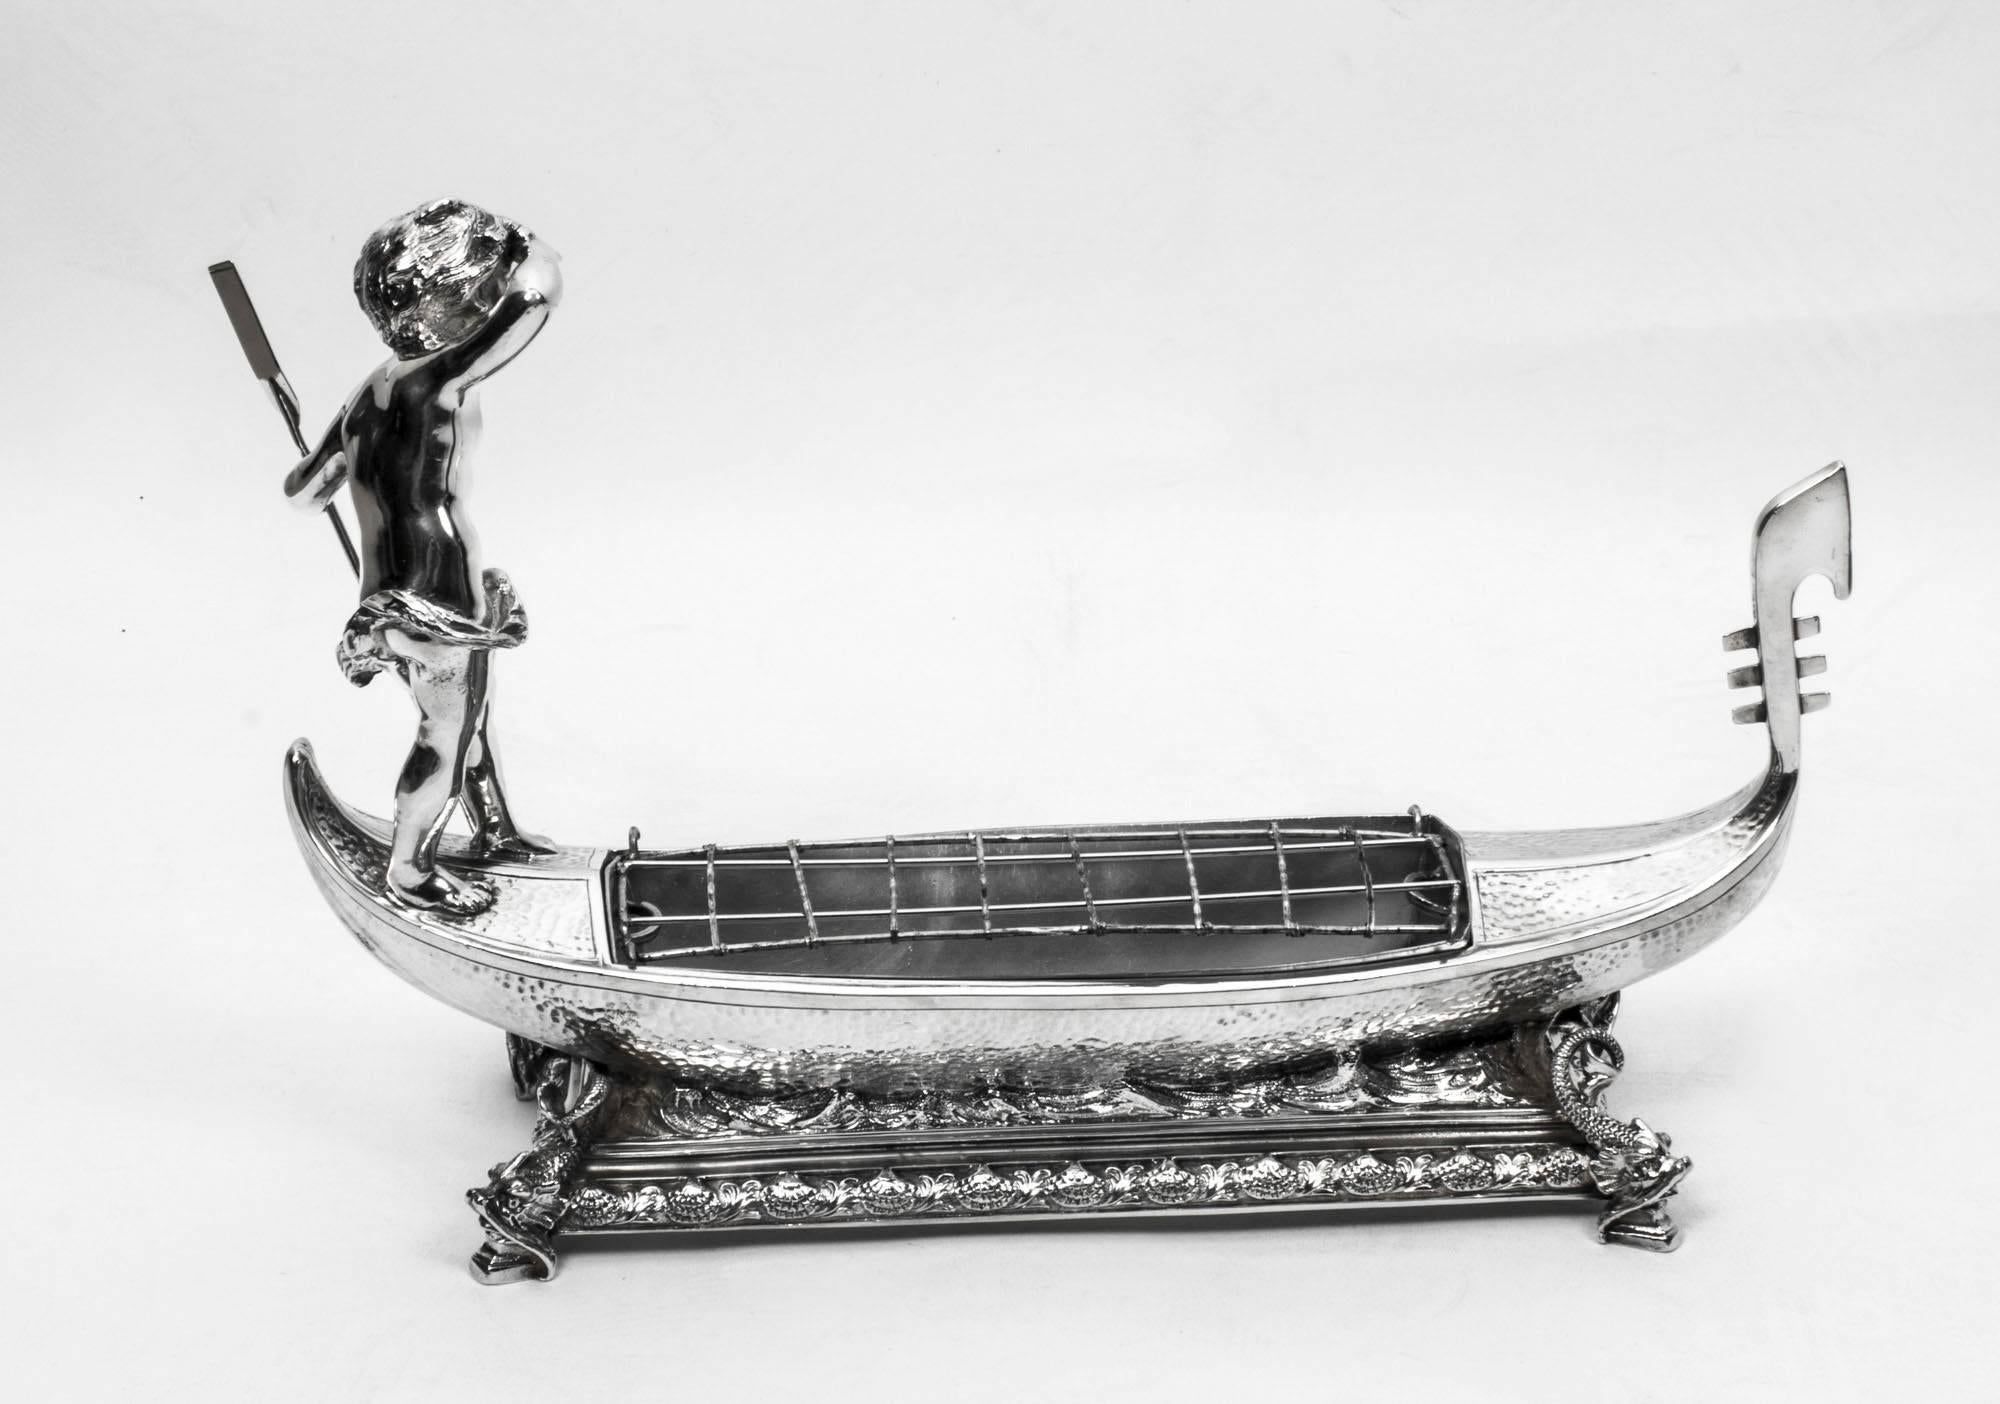 This is an exquisite antique silver-plated Victorian centrepiece in the form of a gondola with a removable jardiniere. The underside bears the impressed mark of the silversmith that made it, William Maples & Sons, circa 1890 in date.

There is